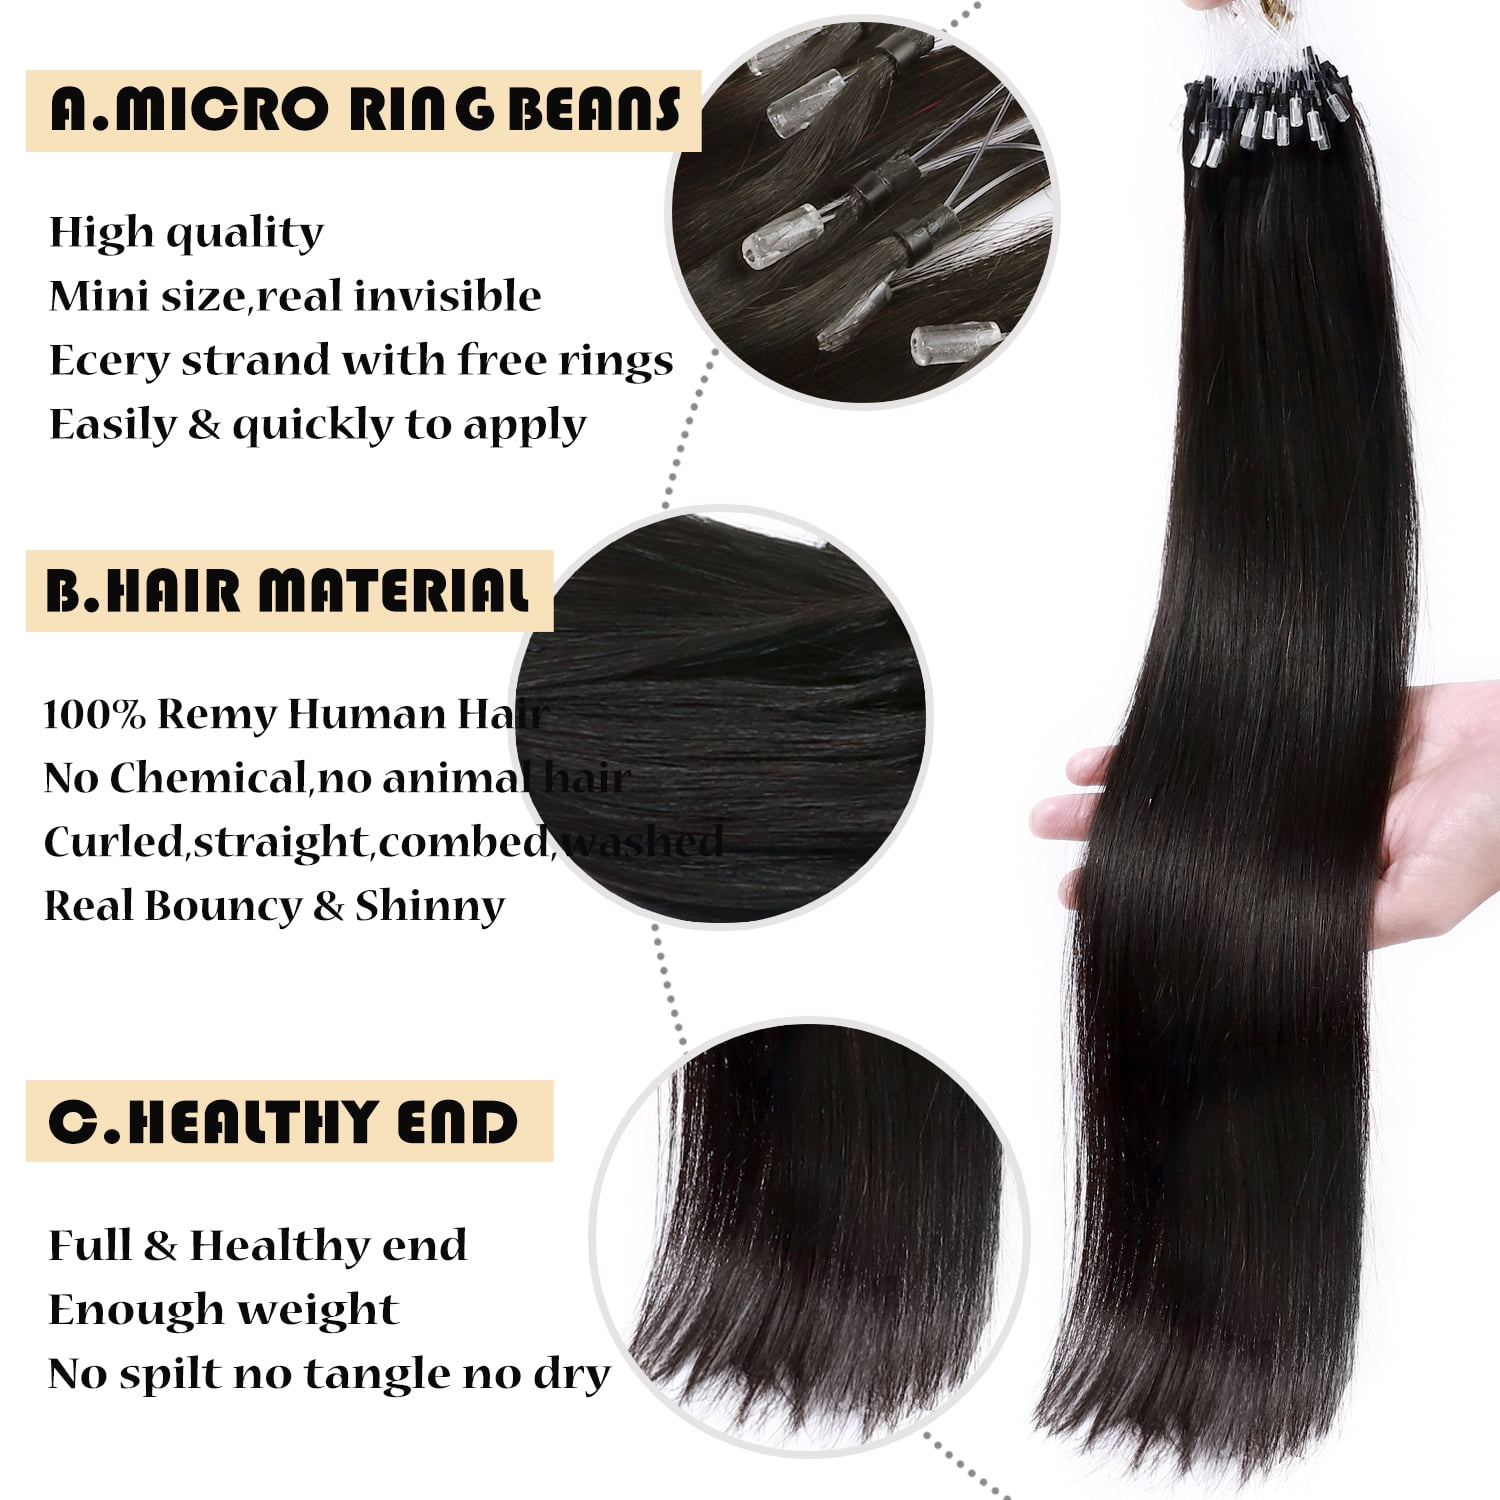 Micro ring hair extensions body wave n°2 - Expert Hair Extension